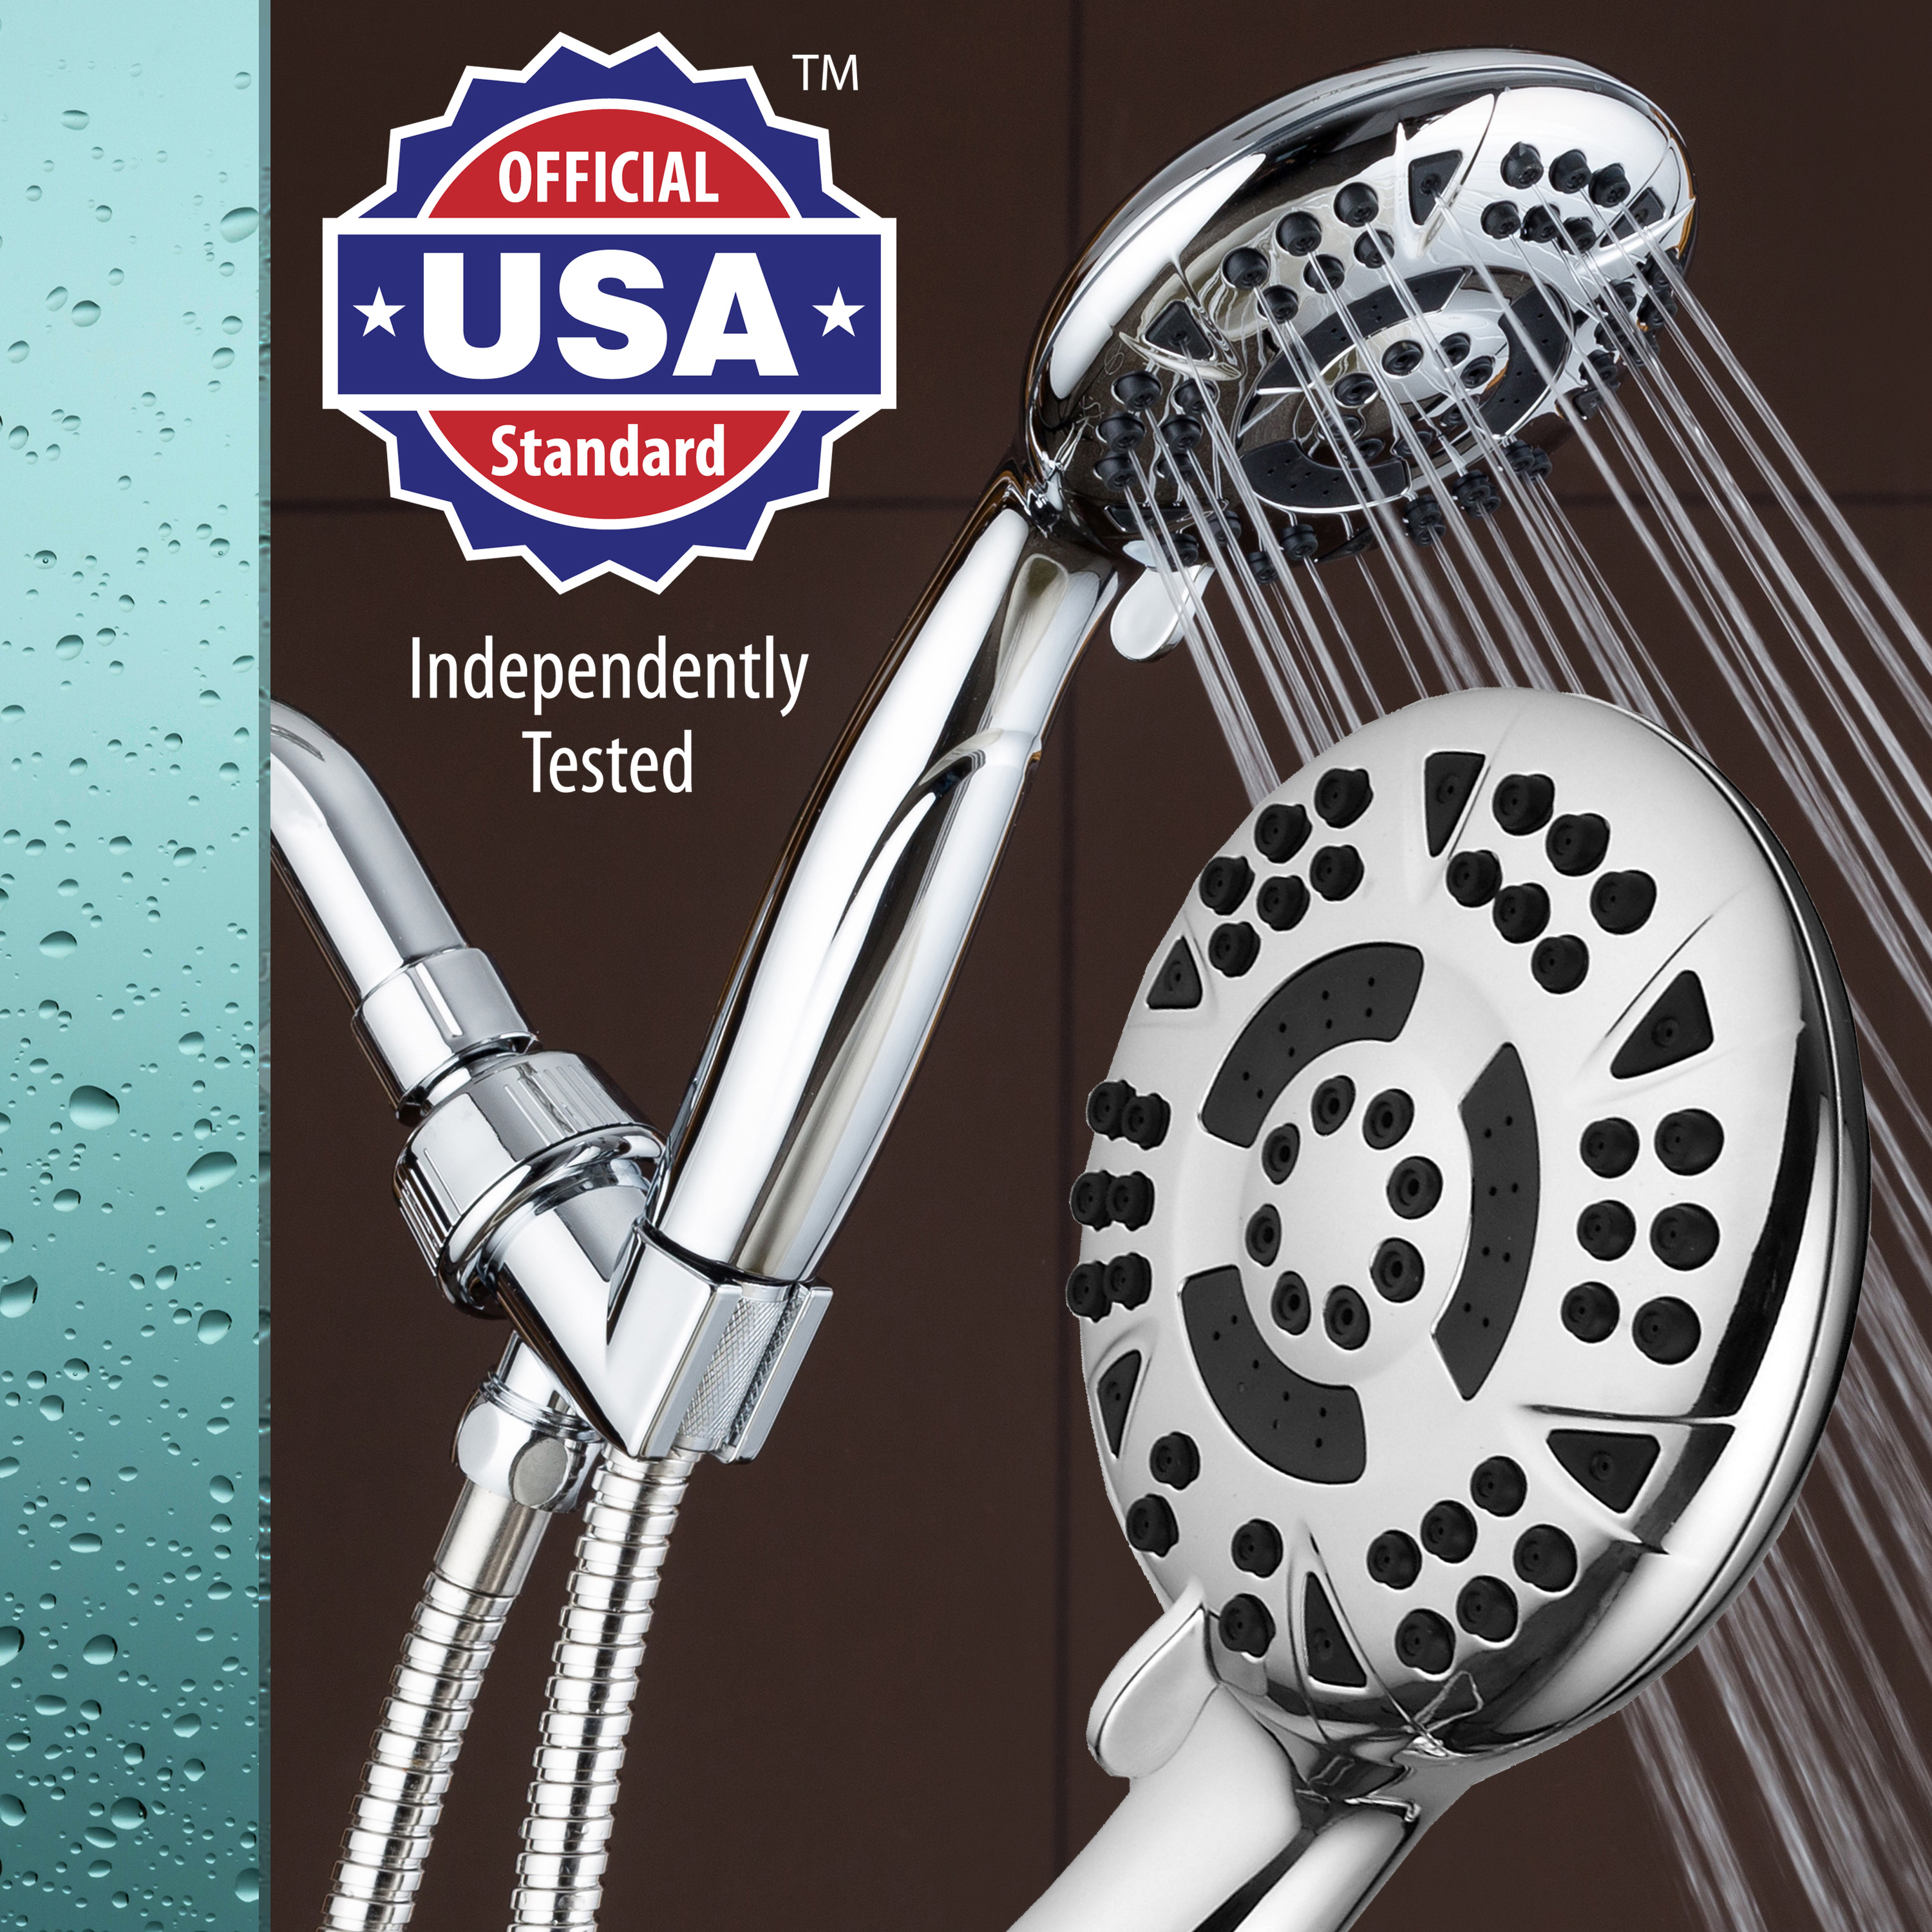 AquaDance High Pressure 6 Setting 4.15 inch Chrome Face Hand Held Shower Head with Hose - image 1 of 7